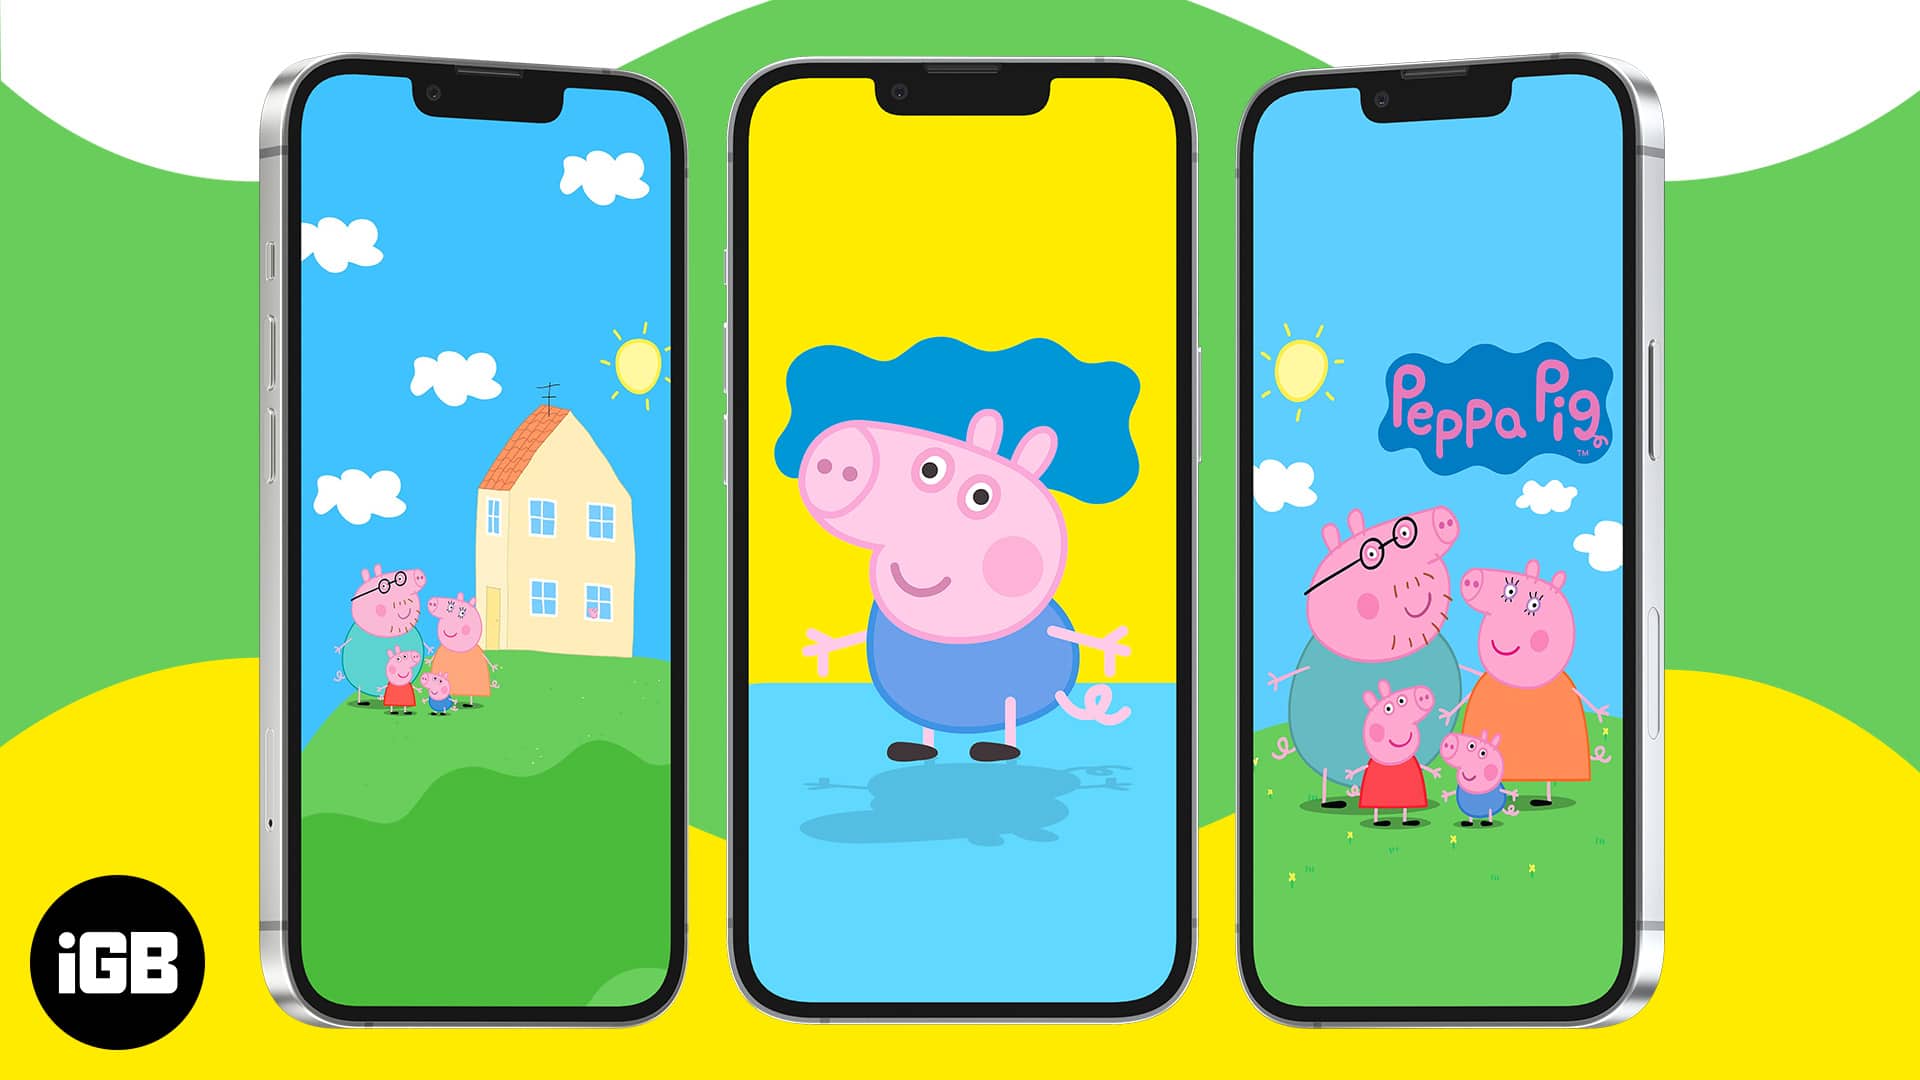 Peppa Pig Horror Wallpaper Discover more Desktop horror story House  house scary Iphone wallpapers httpswwwenjpgcomp  Horror Peppa pig  Scary wallpaper